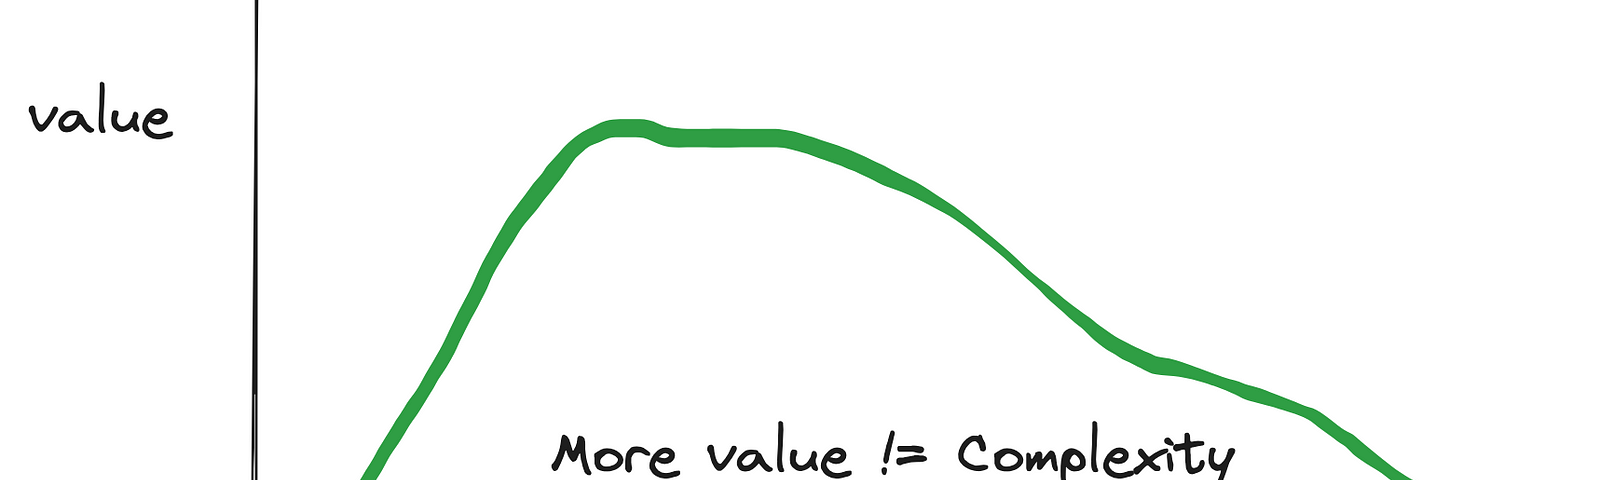 Graph about how complexity correlates to value — the more complex the work beyond a certain point, the lower the value